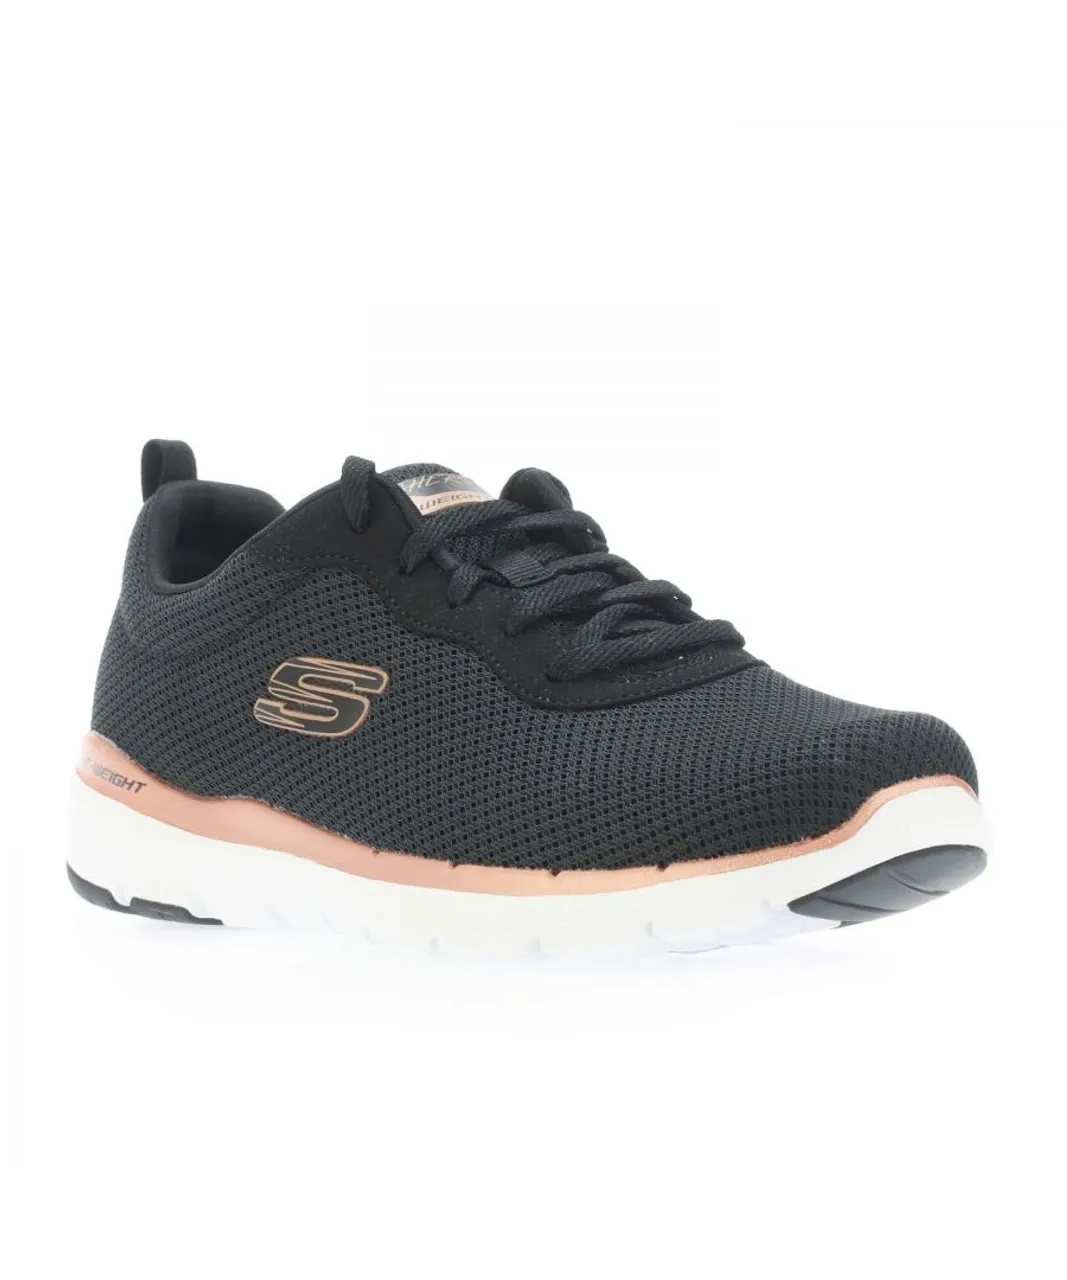 Skechers Womenss Flex Appeal 3.0 First Insight Trainers in Black Mesh